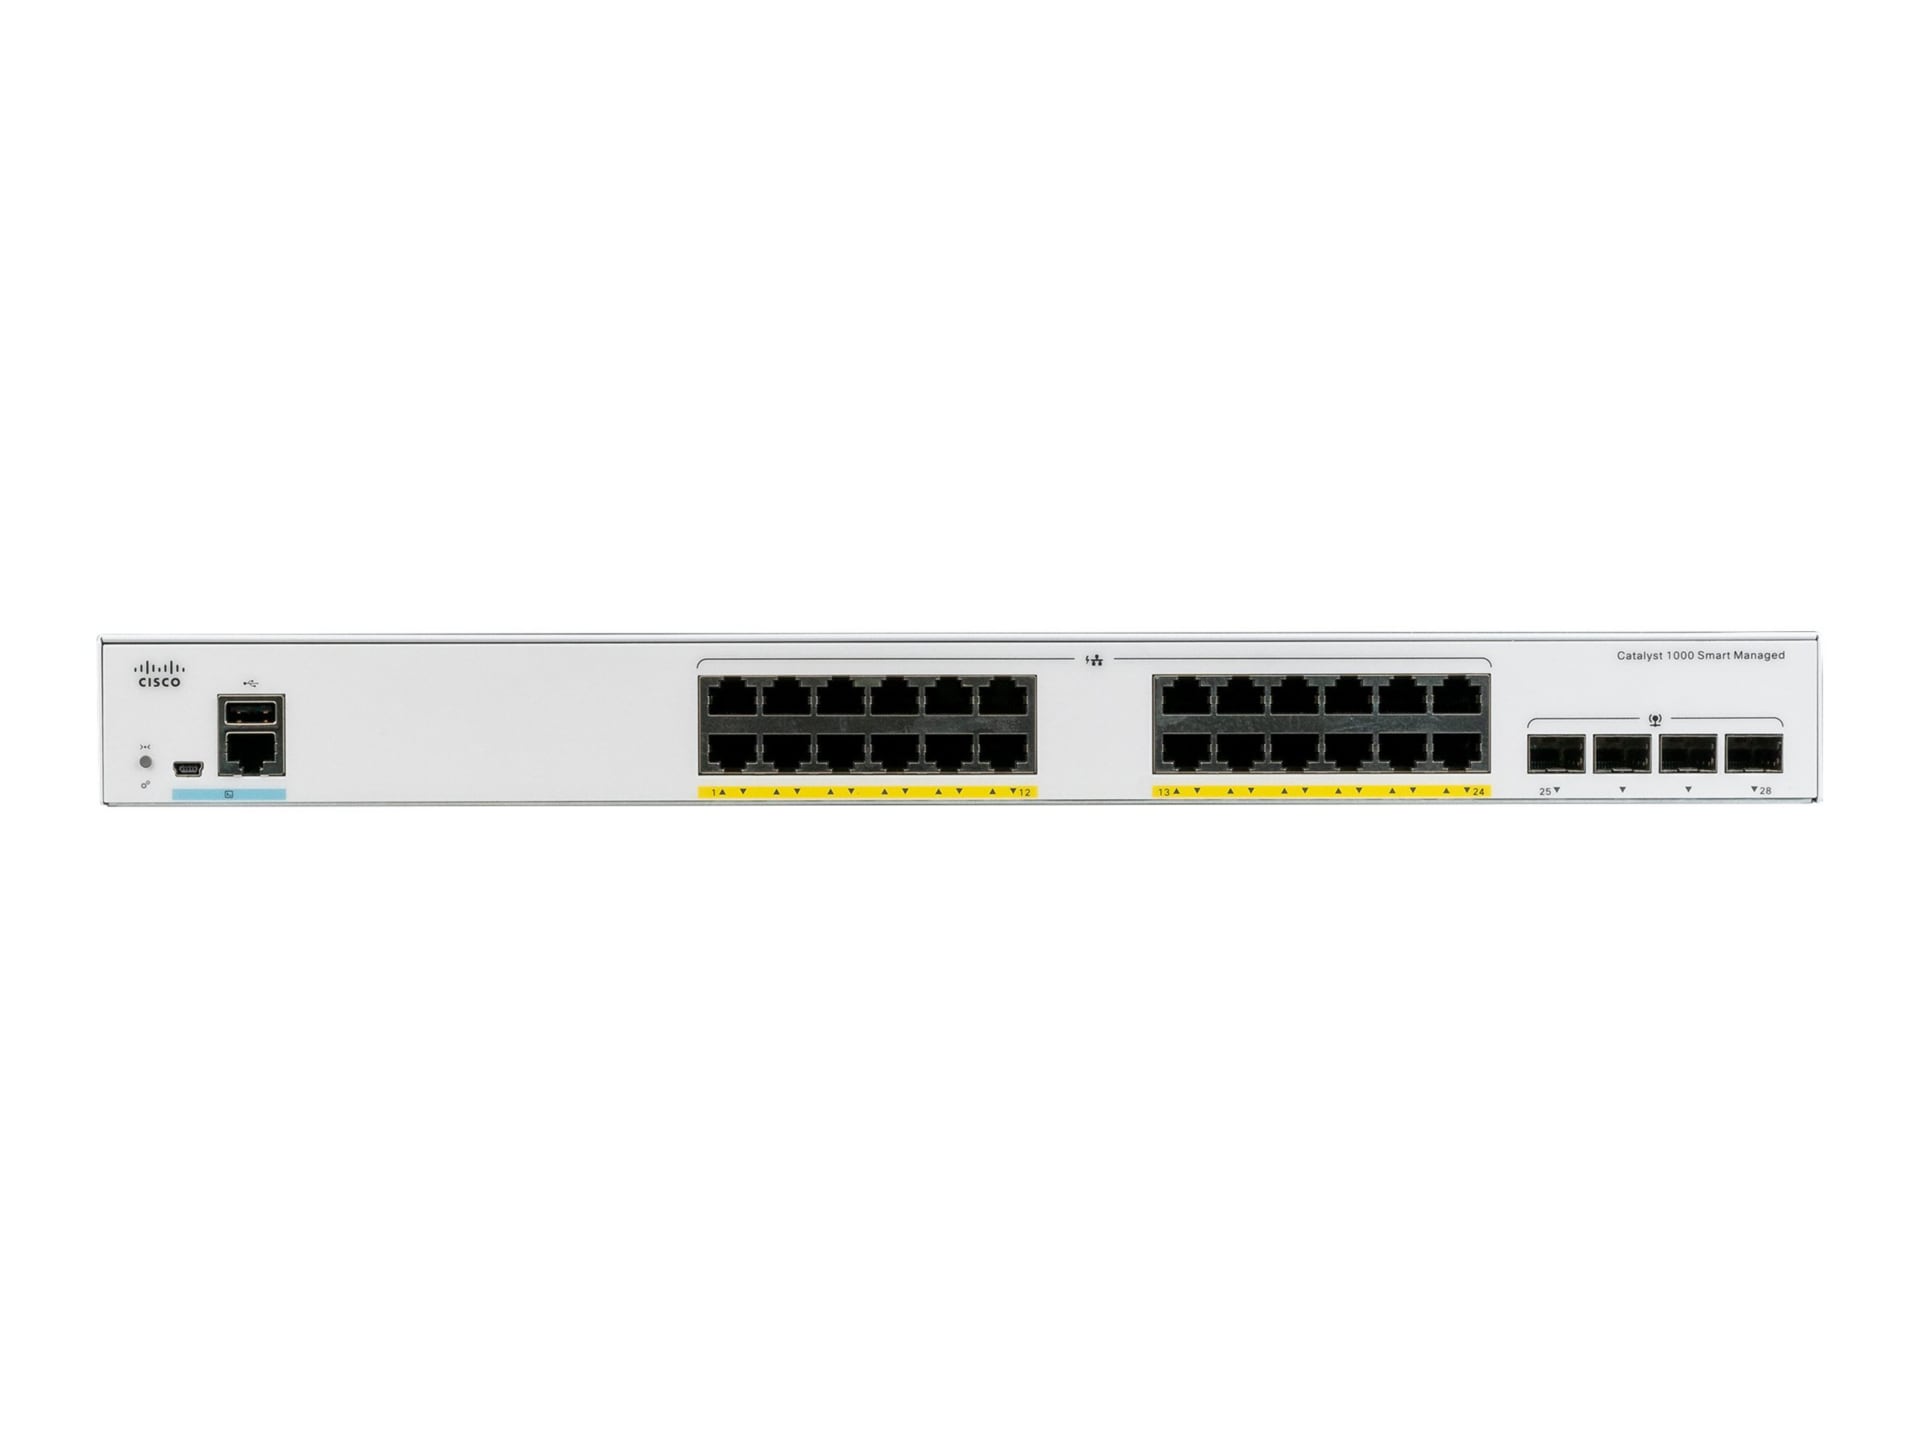 Cisco Catalyst 1000-24T-4G-L - switch - 24 ports - managed - rack-mountable